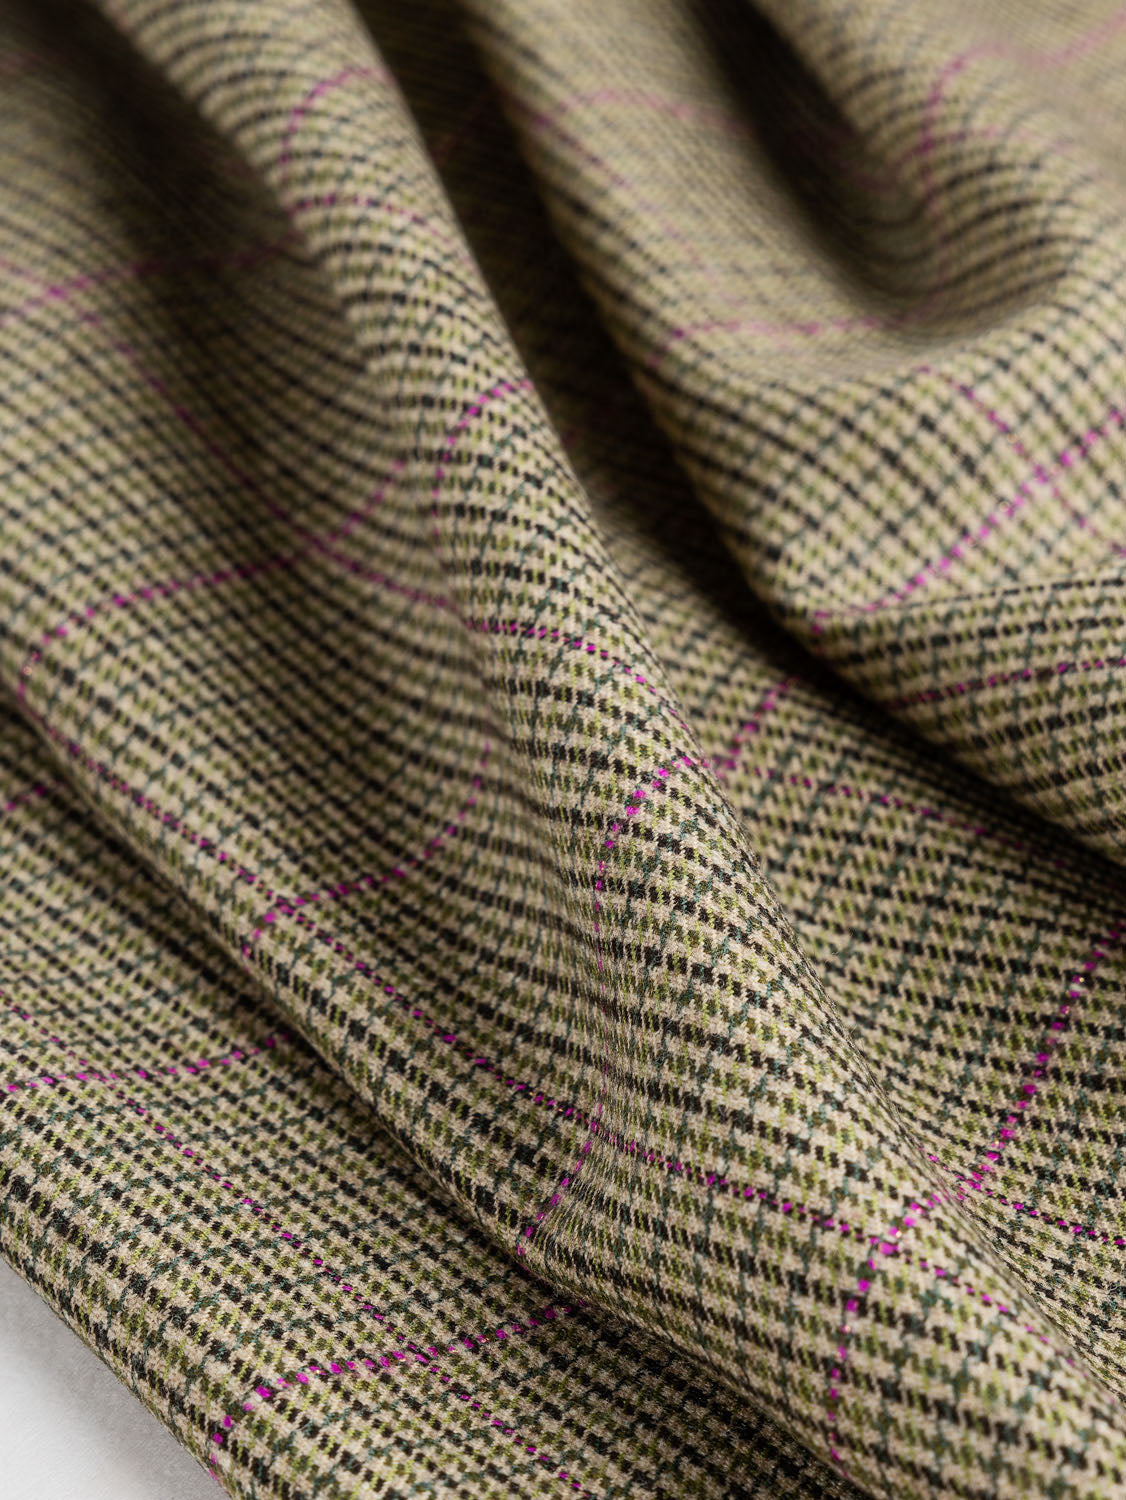 F-WOL066-Houndstooth-Windowpane-Suiting-Deadstock-Olive-Green-and-Birch-and-Magenta-Core-Fabrics-scrunched.jpg